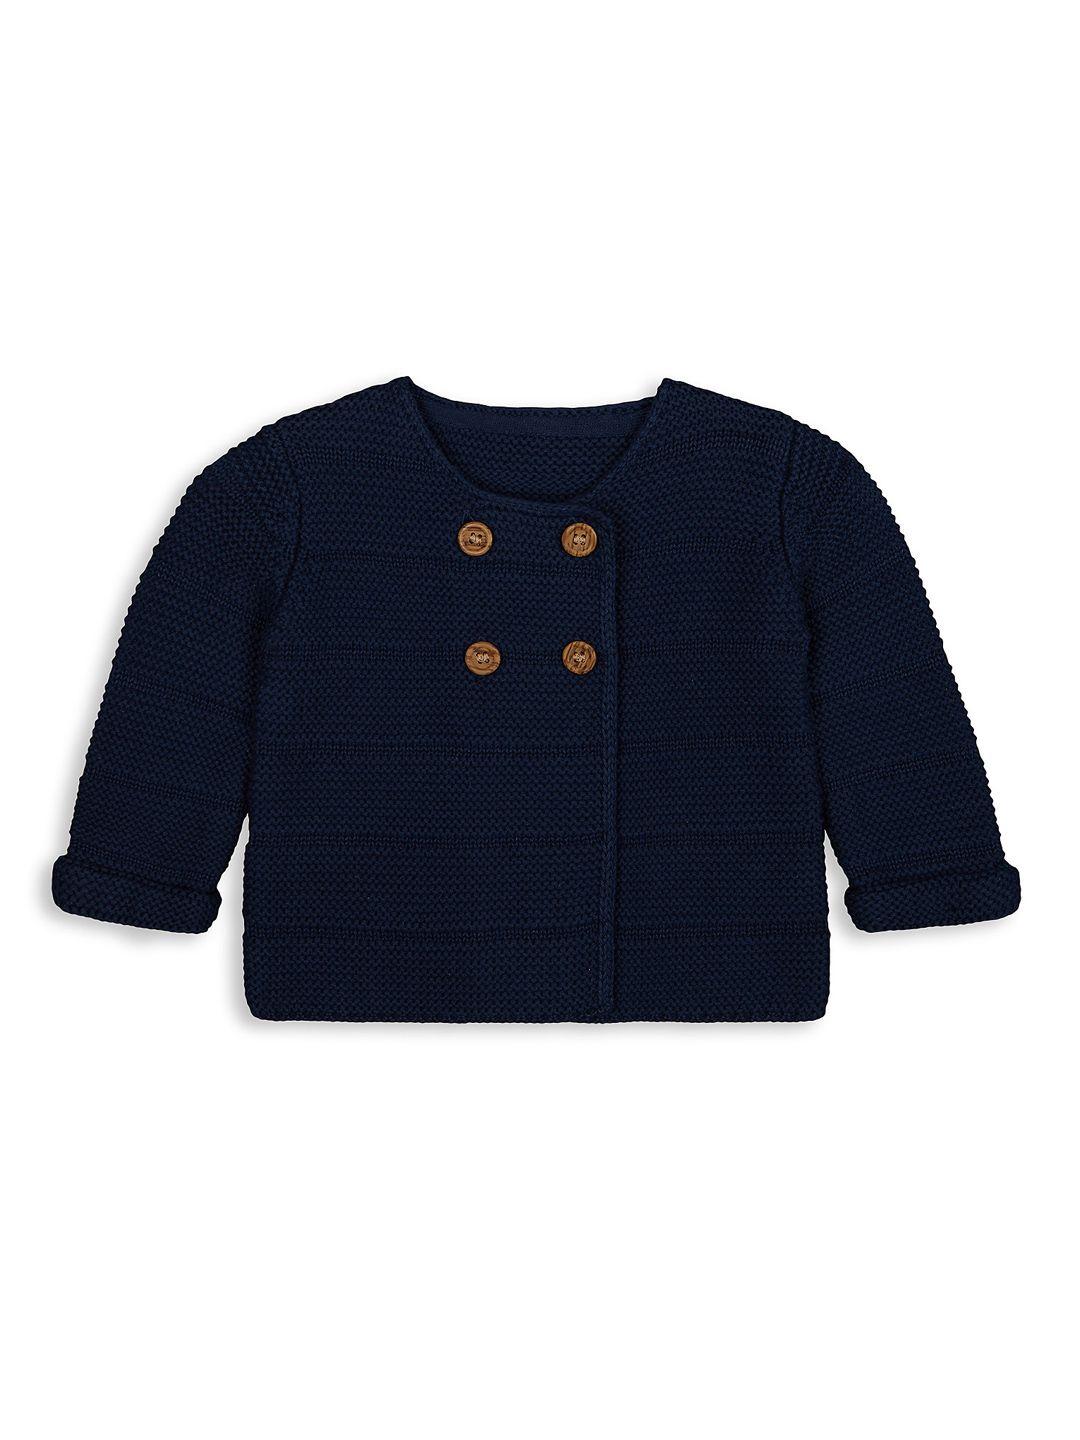 mothercare-infant-boys-navy-blue-solid-pure-cotton-cardigan